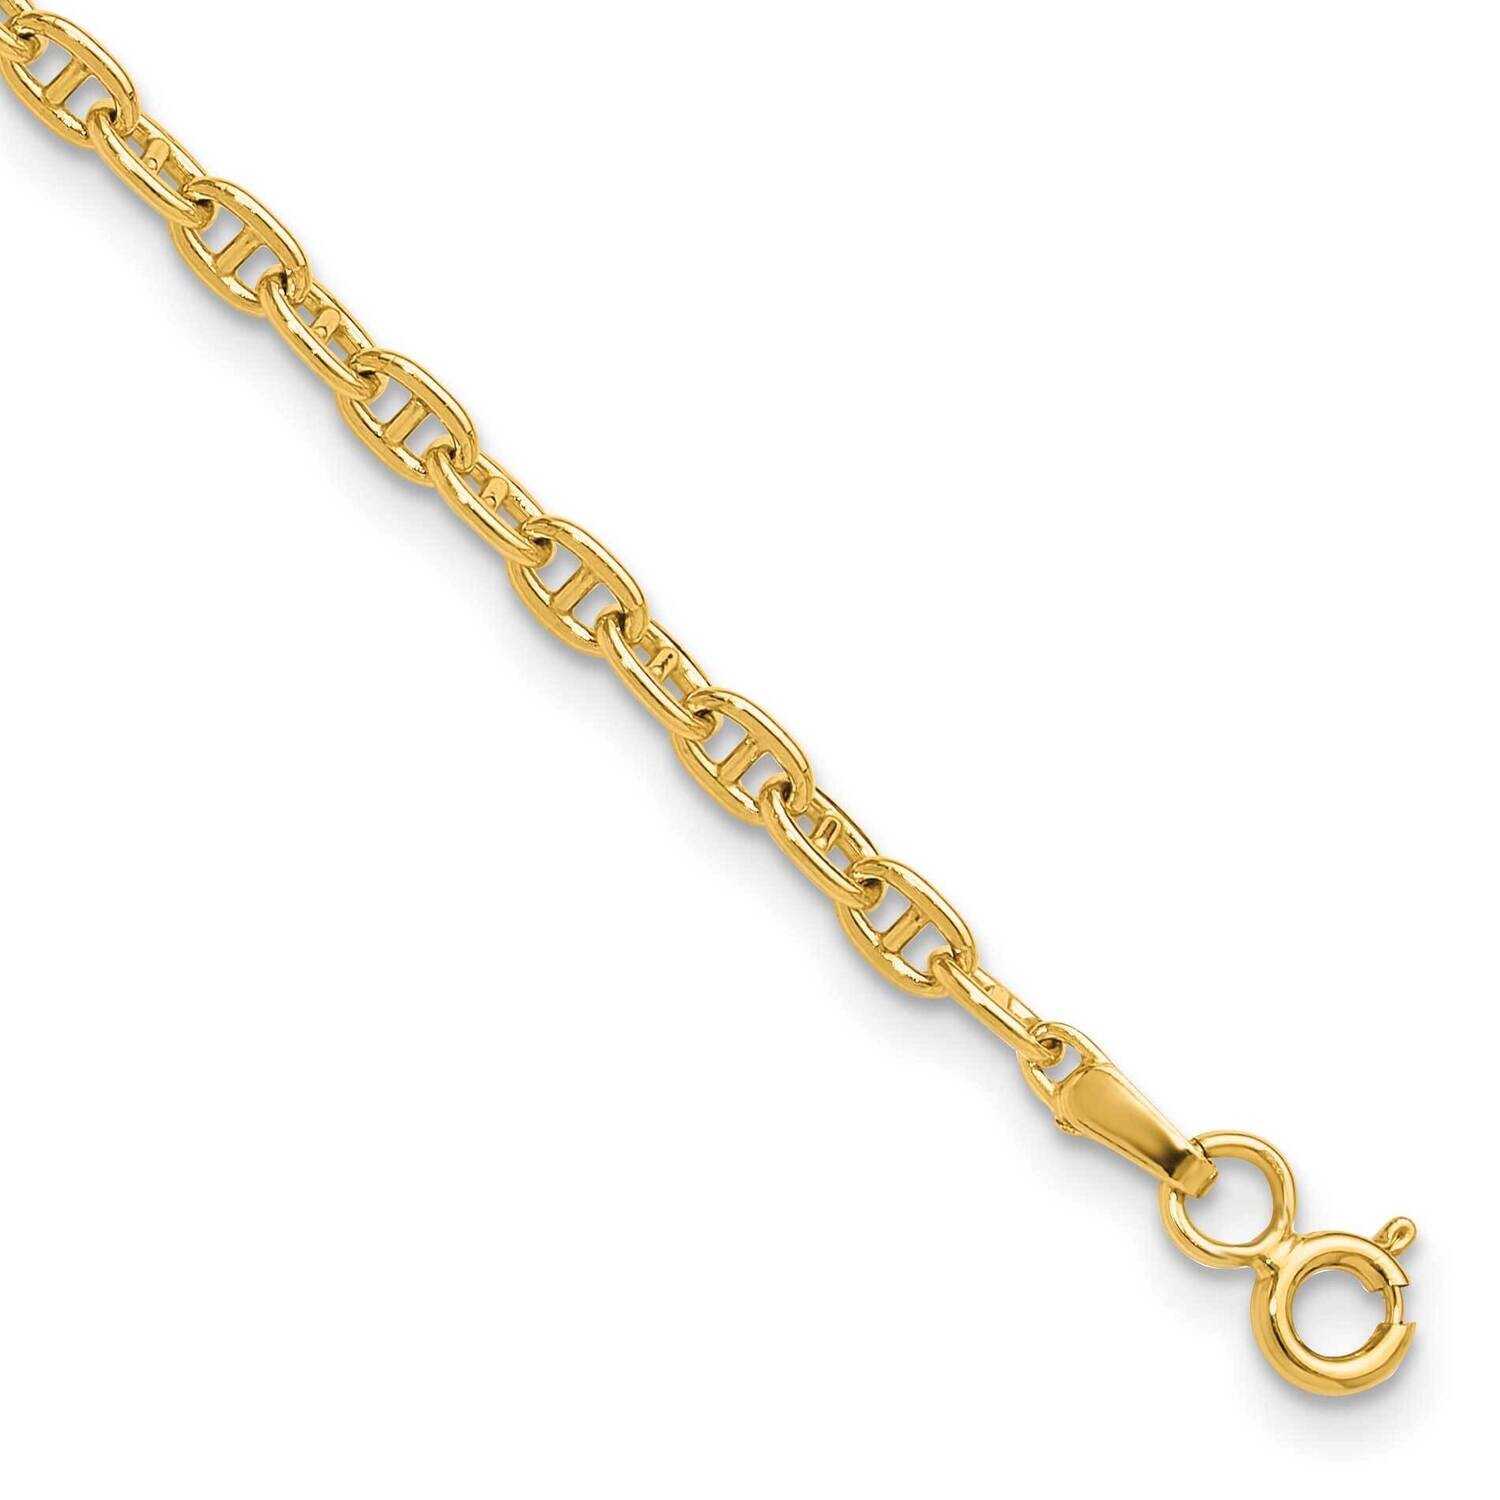 3.0mm Mariners Link Chain 8 Inch 14k Gold MA080-8